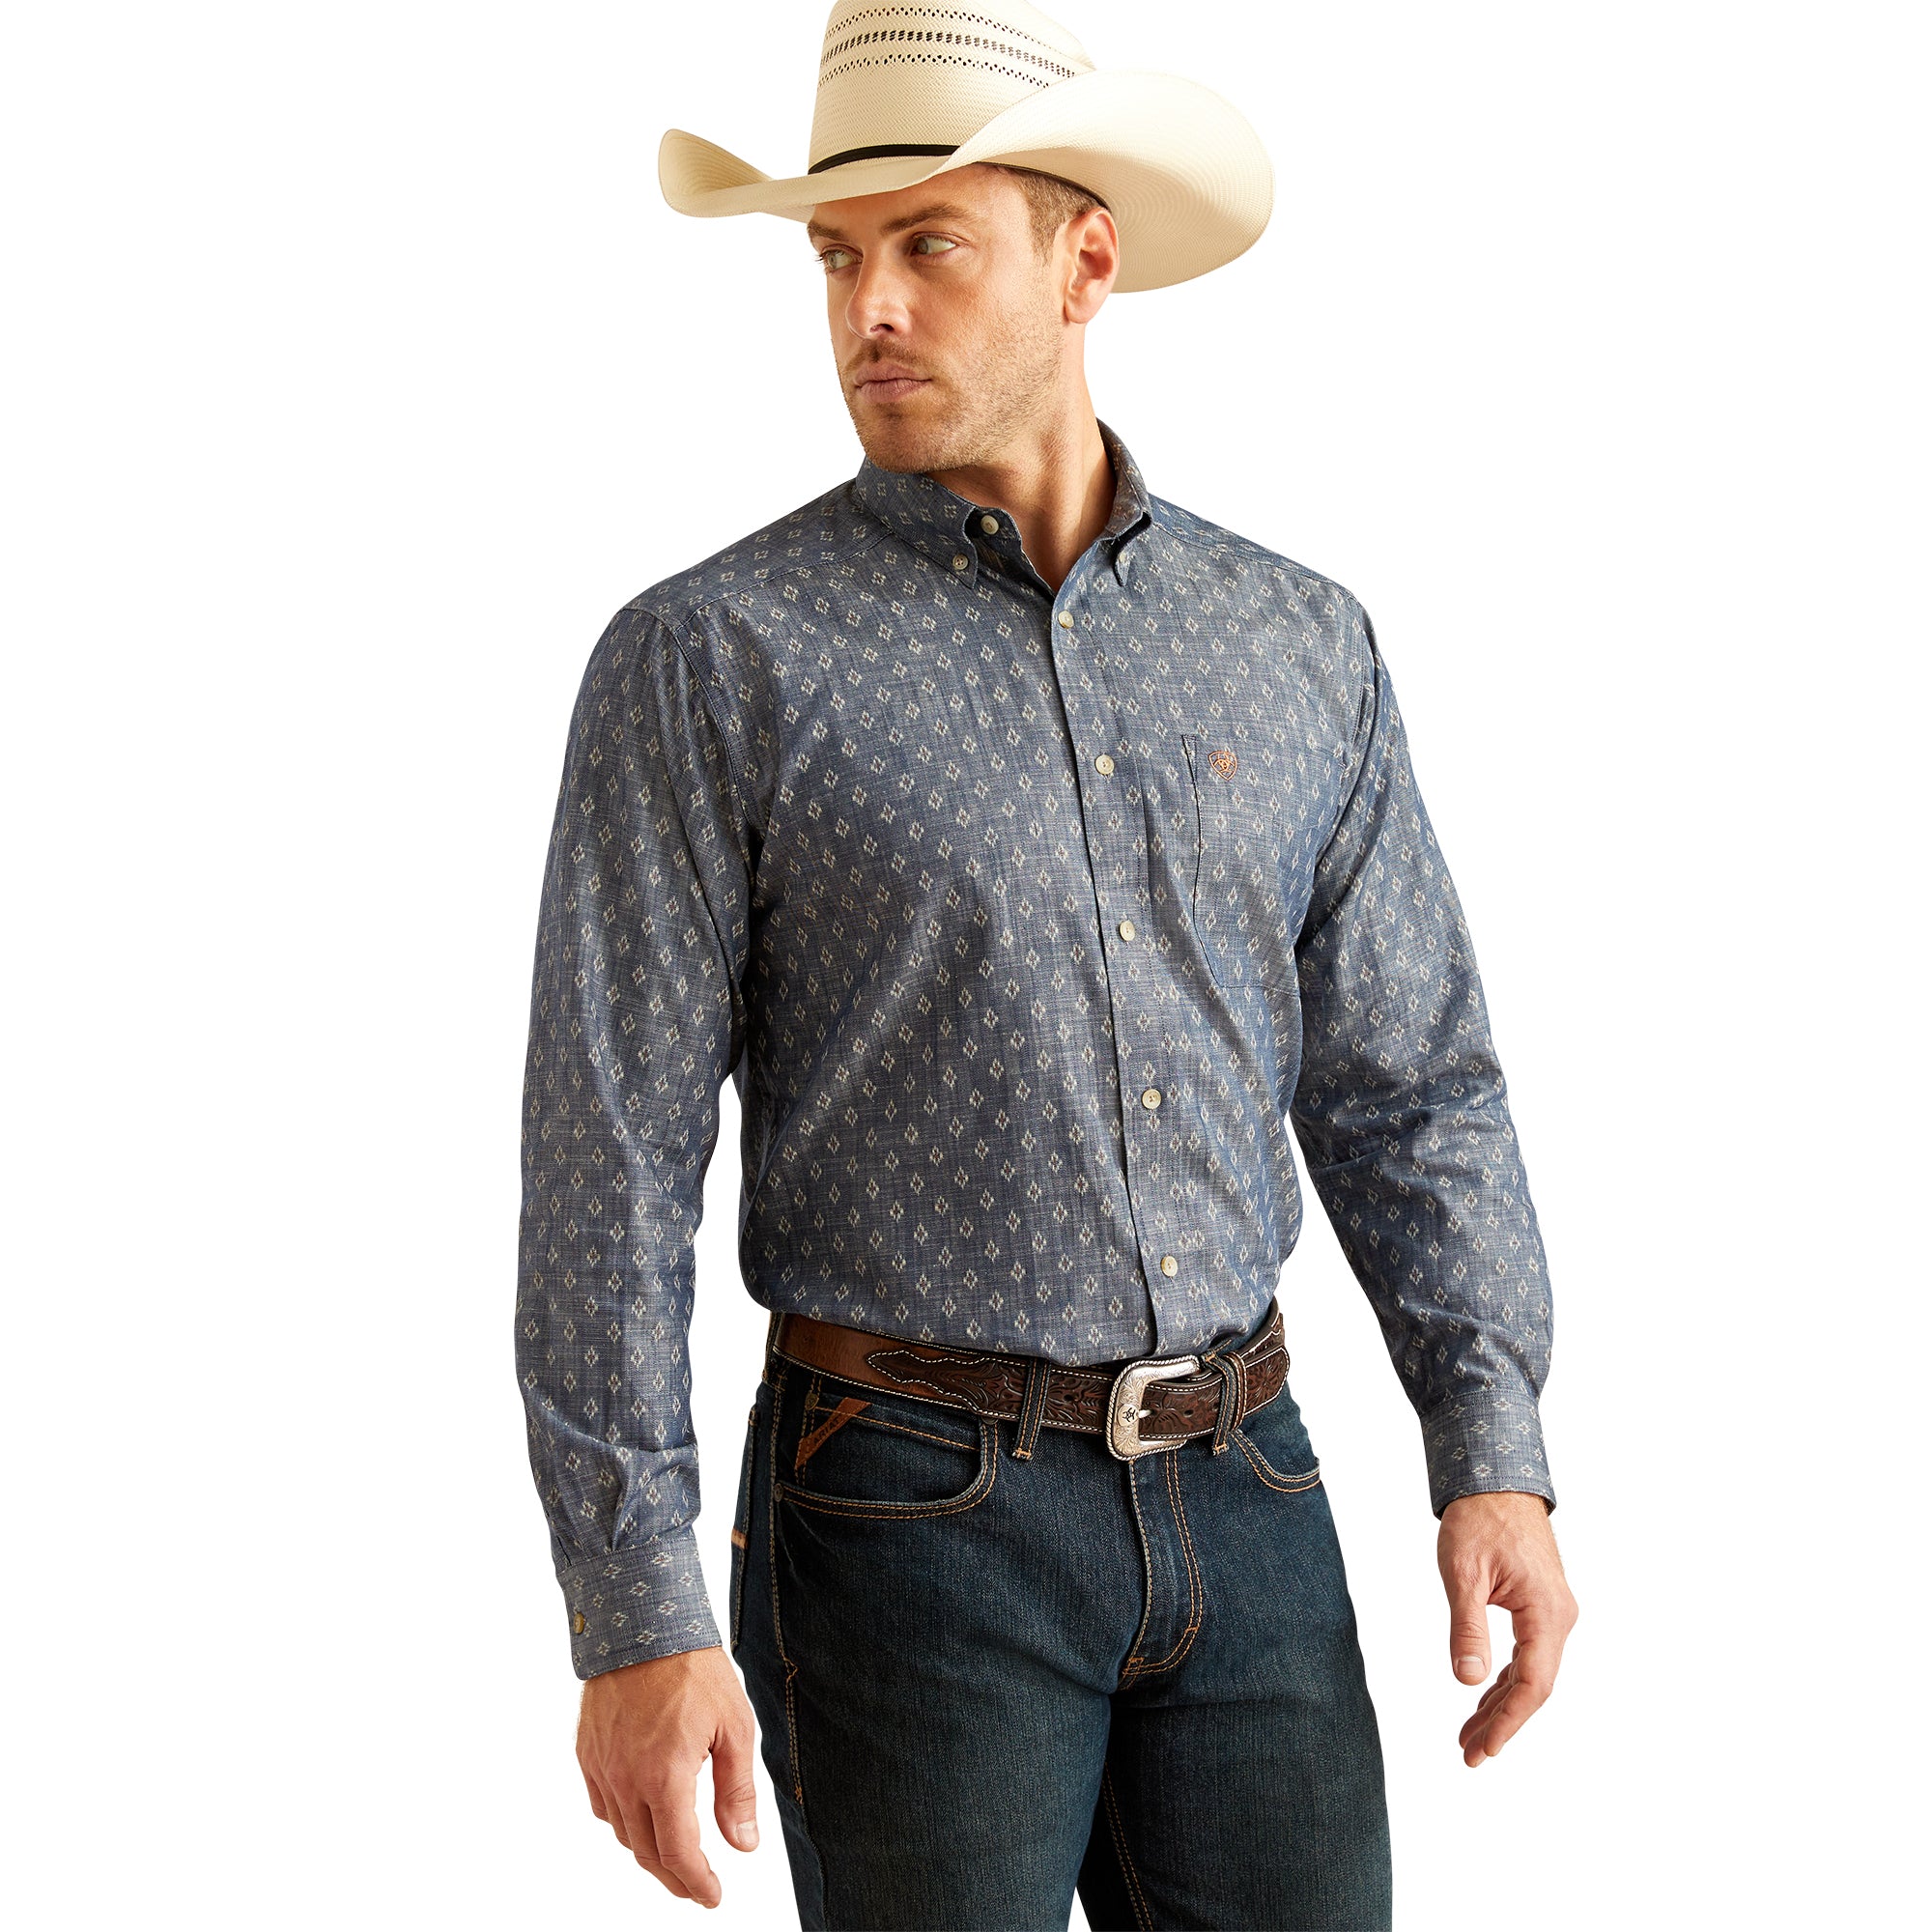 Mens Western Shirts: Elevate Your Style with Timeless Cowboy Elegance